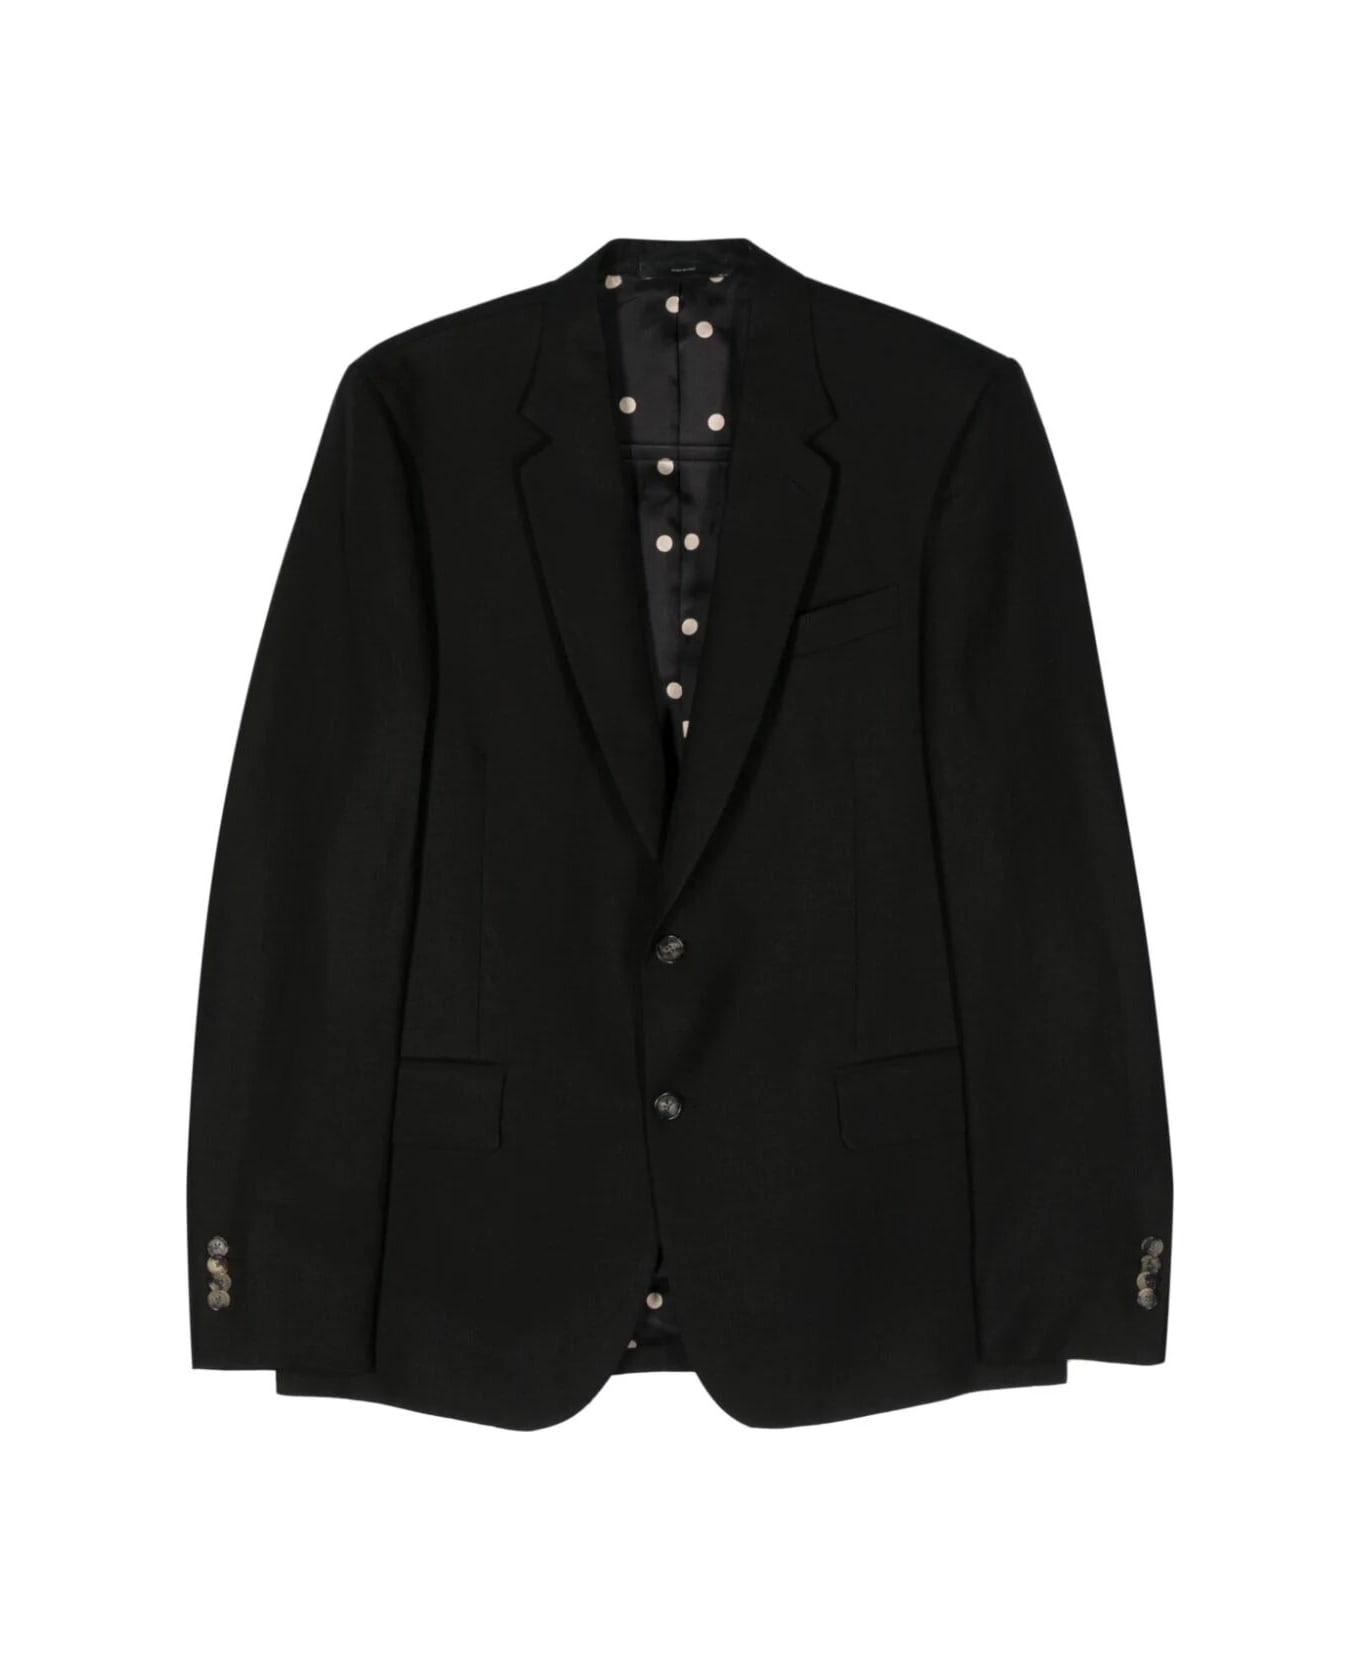 Paul Smith Gents Tailored Fit Two Buttons Jacket - Blues ブレザー